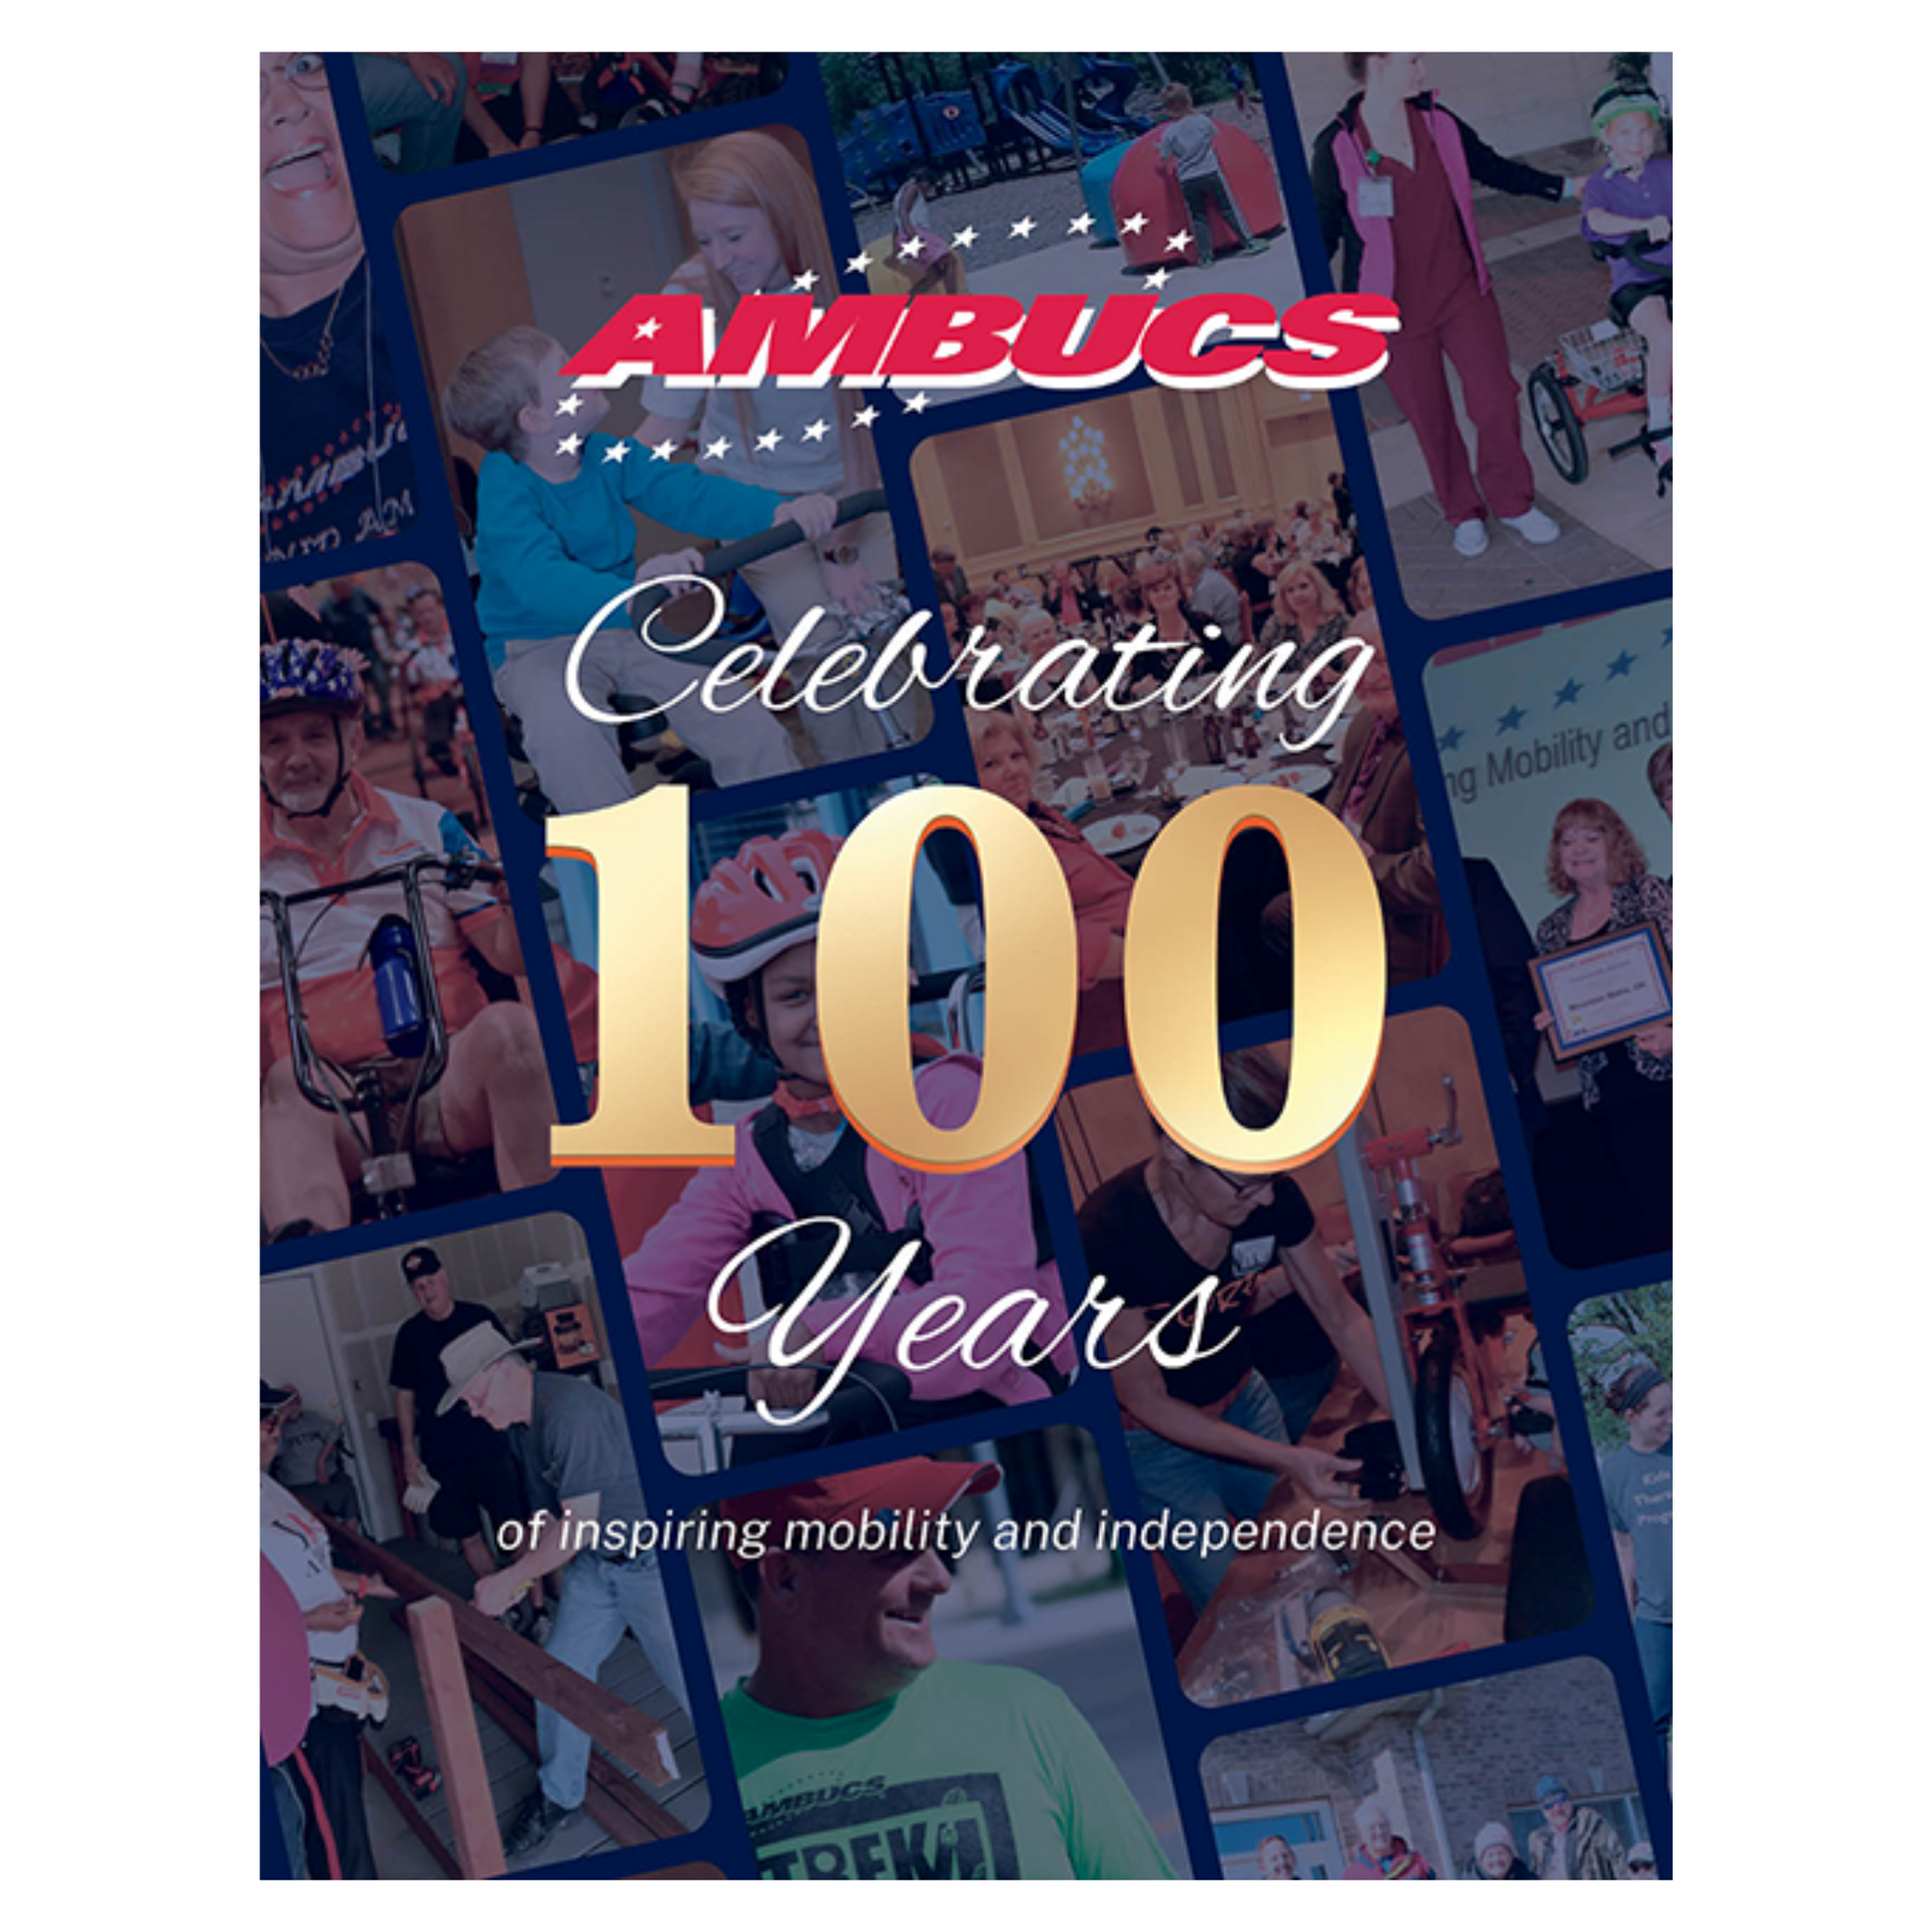 Book cover  has photographs of various people in background with the AMBUCS logo in red and white, title of book in white lettering, Celebrating 100 years of inspiring mobility and independence